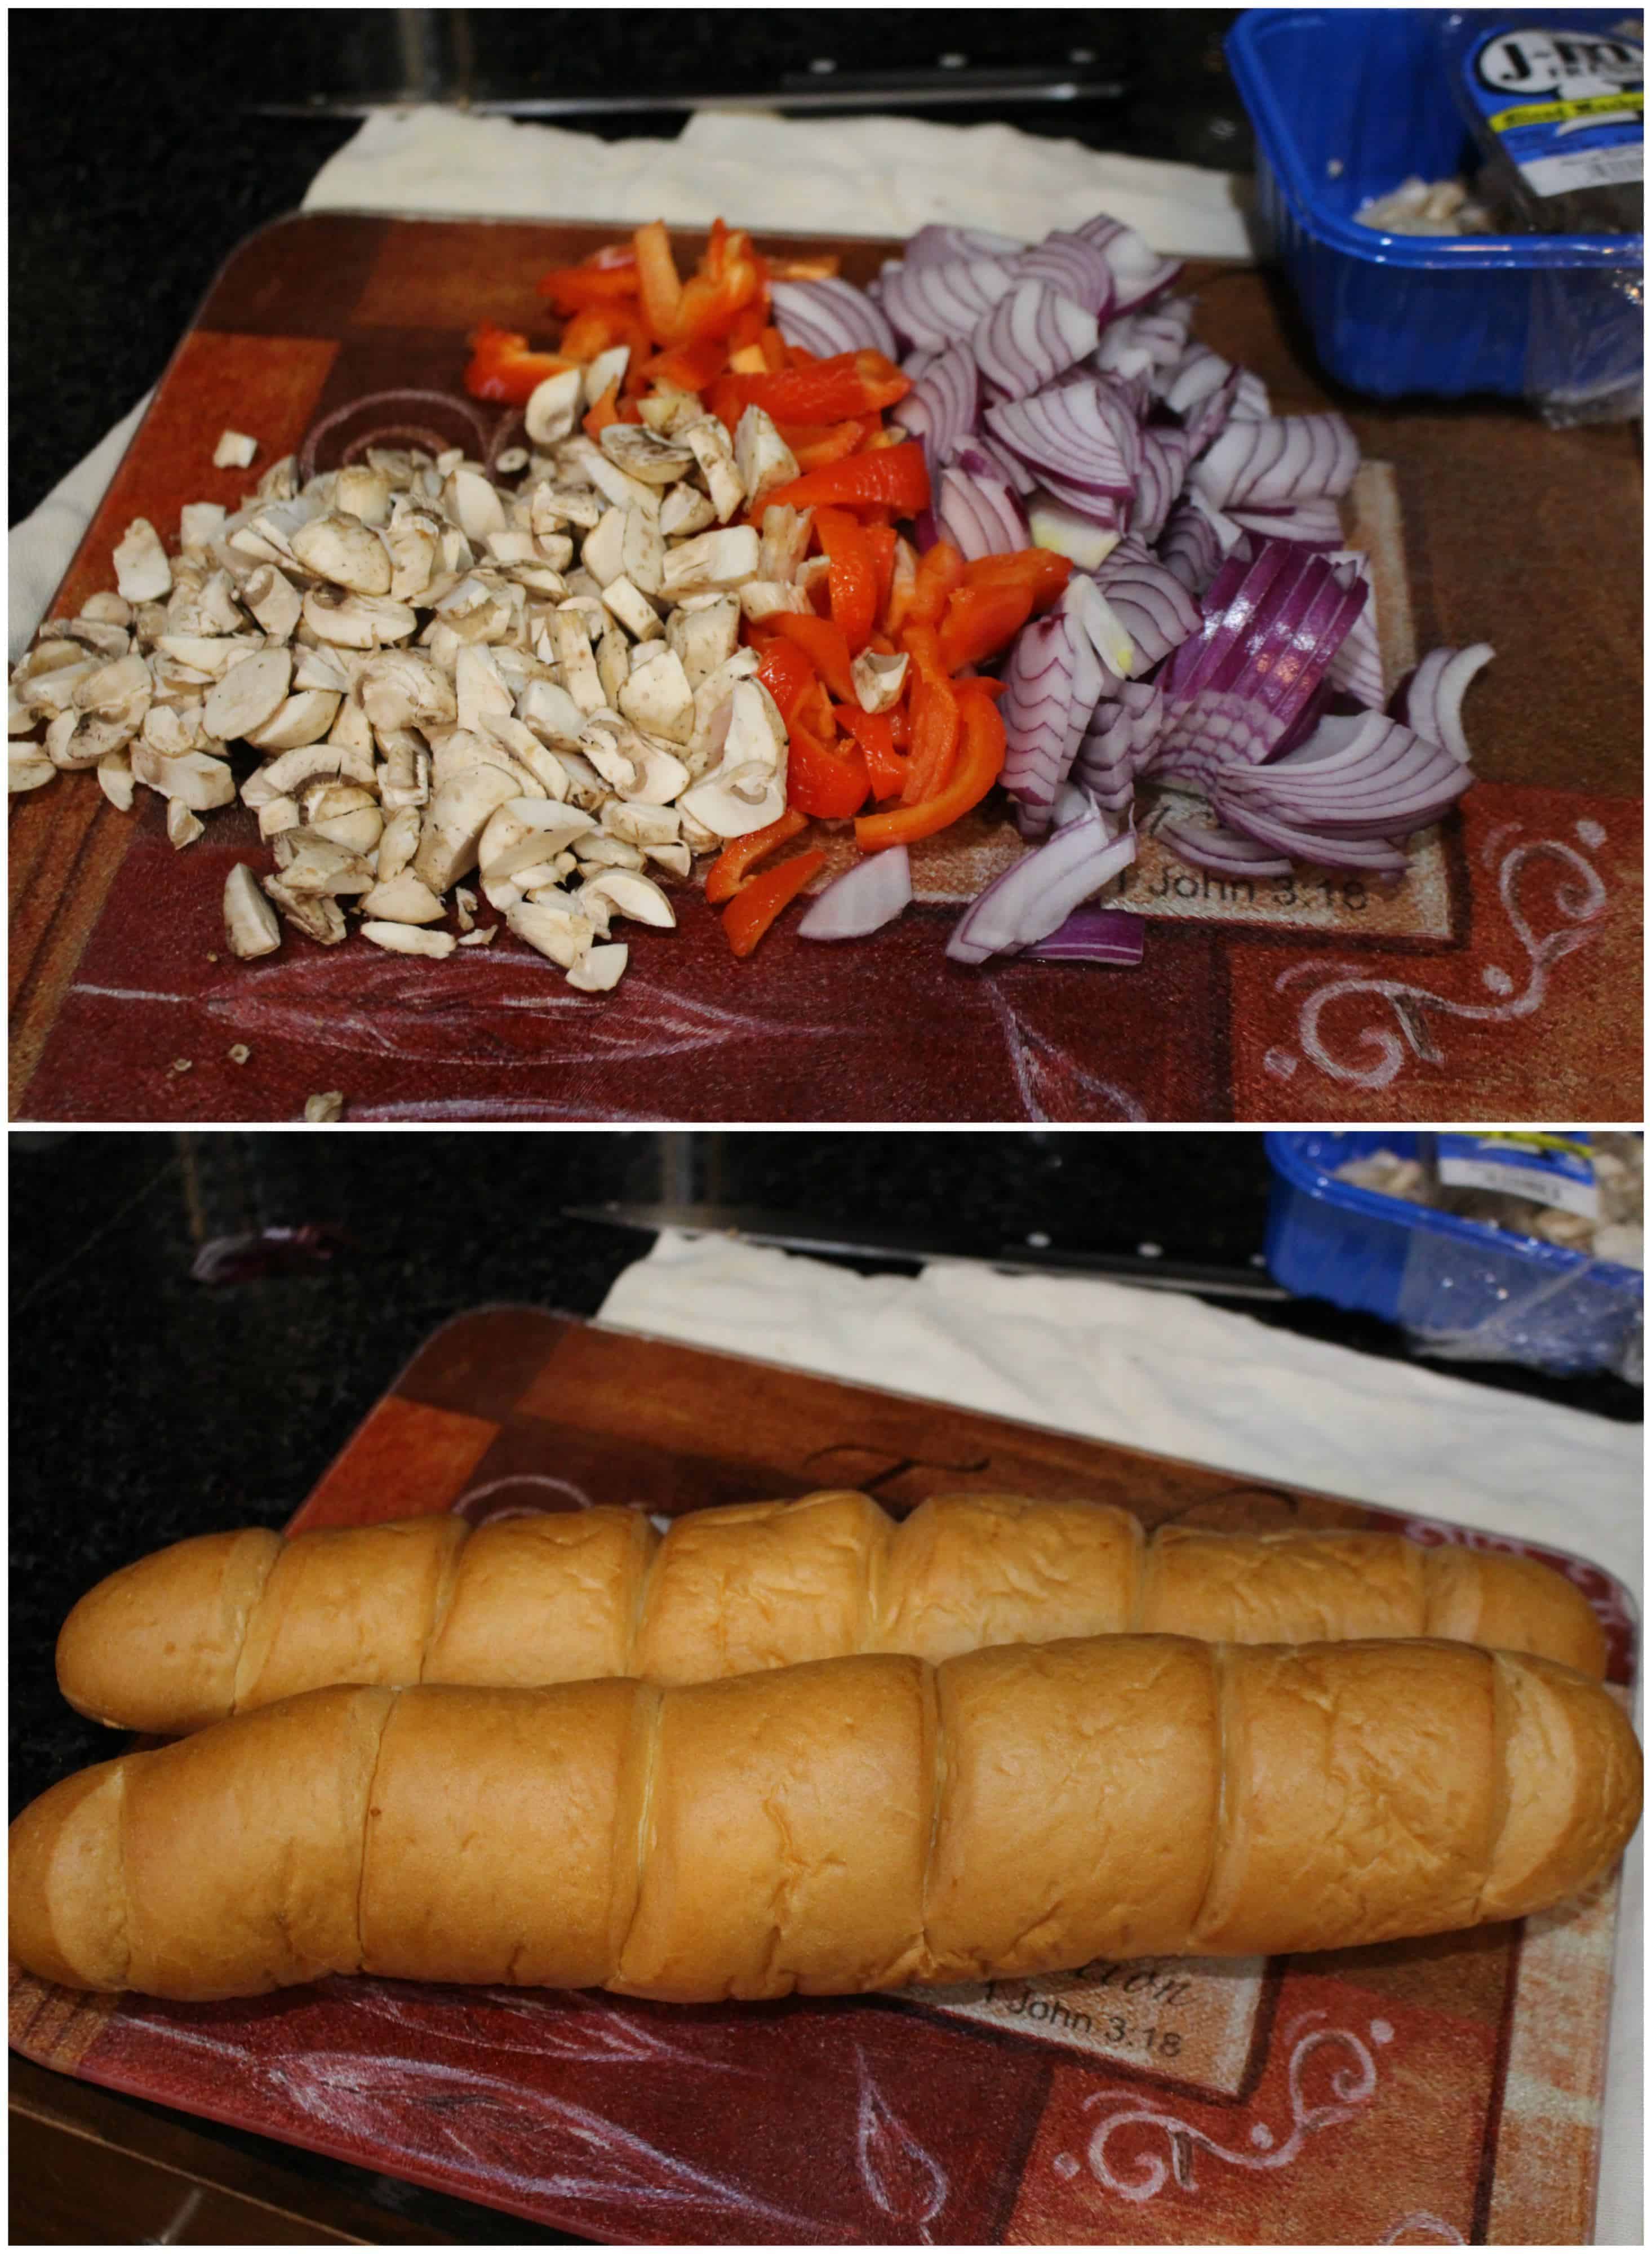 Chopped vegetable and bread.